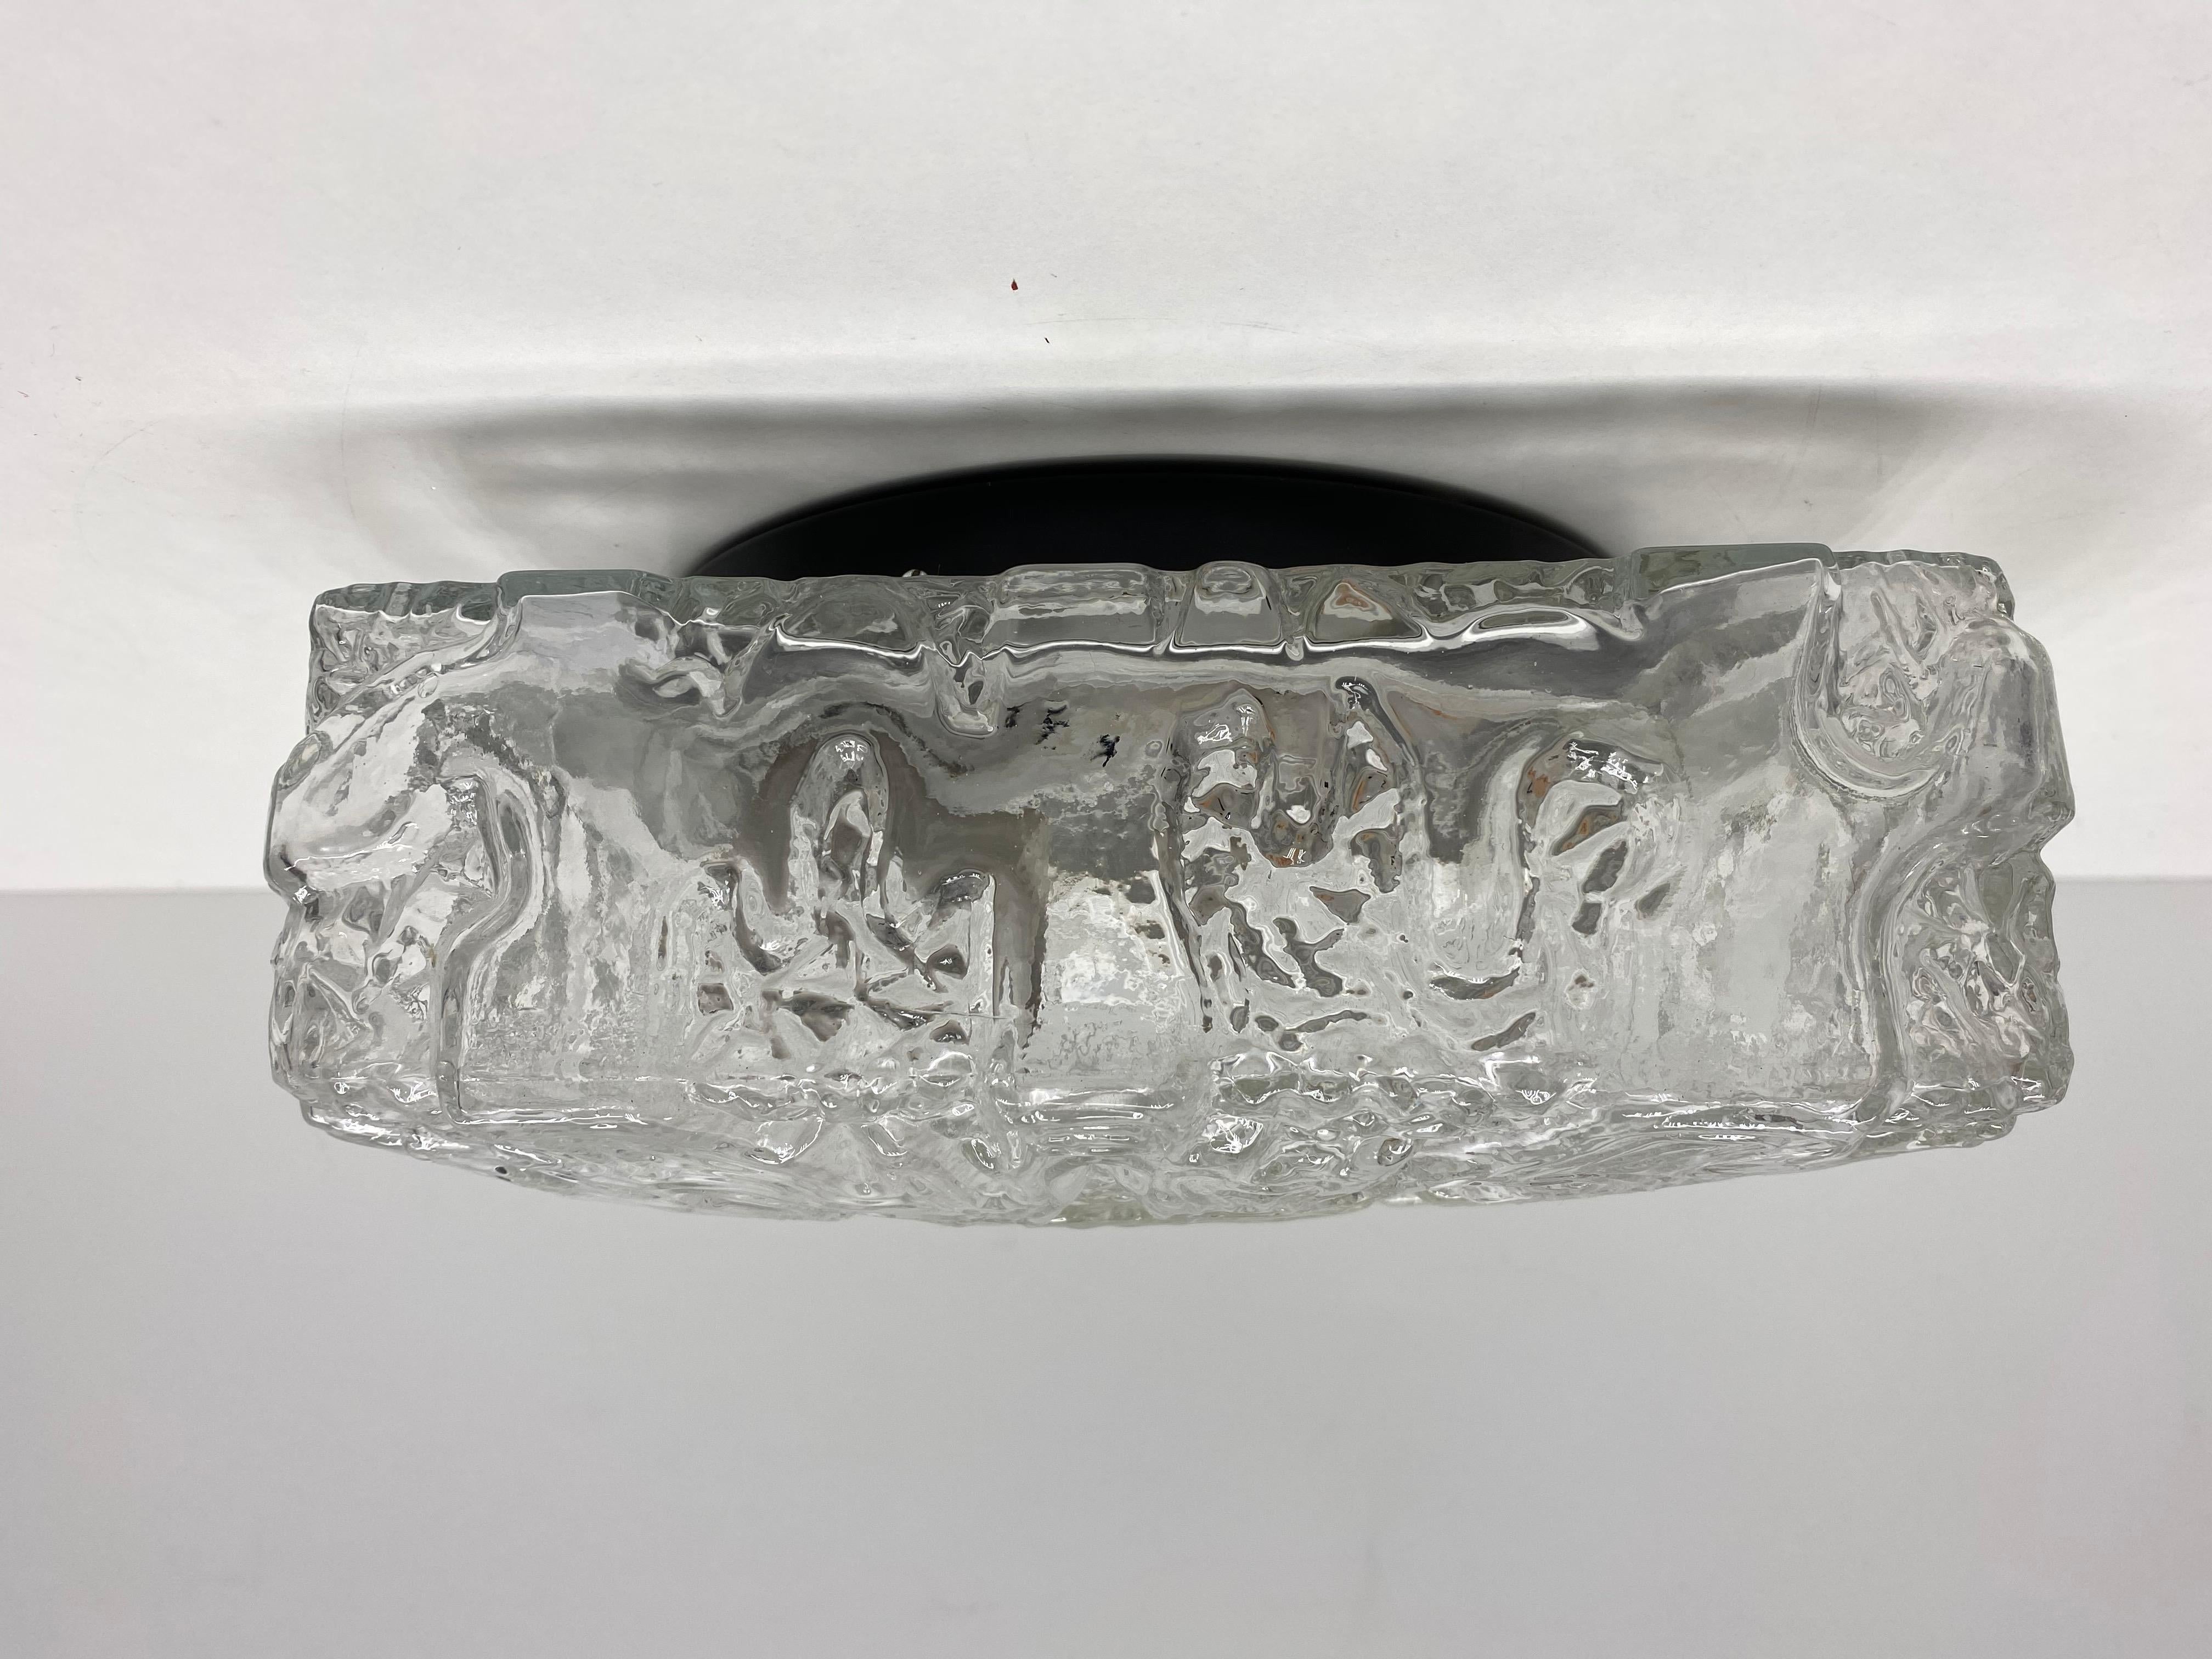 A gorgeous flush mount by German Manufacturer. Heavy ice glass on a metal fixture. The flush mount requires one European E27 Edison bulb, up to 60 watts.